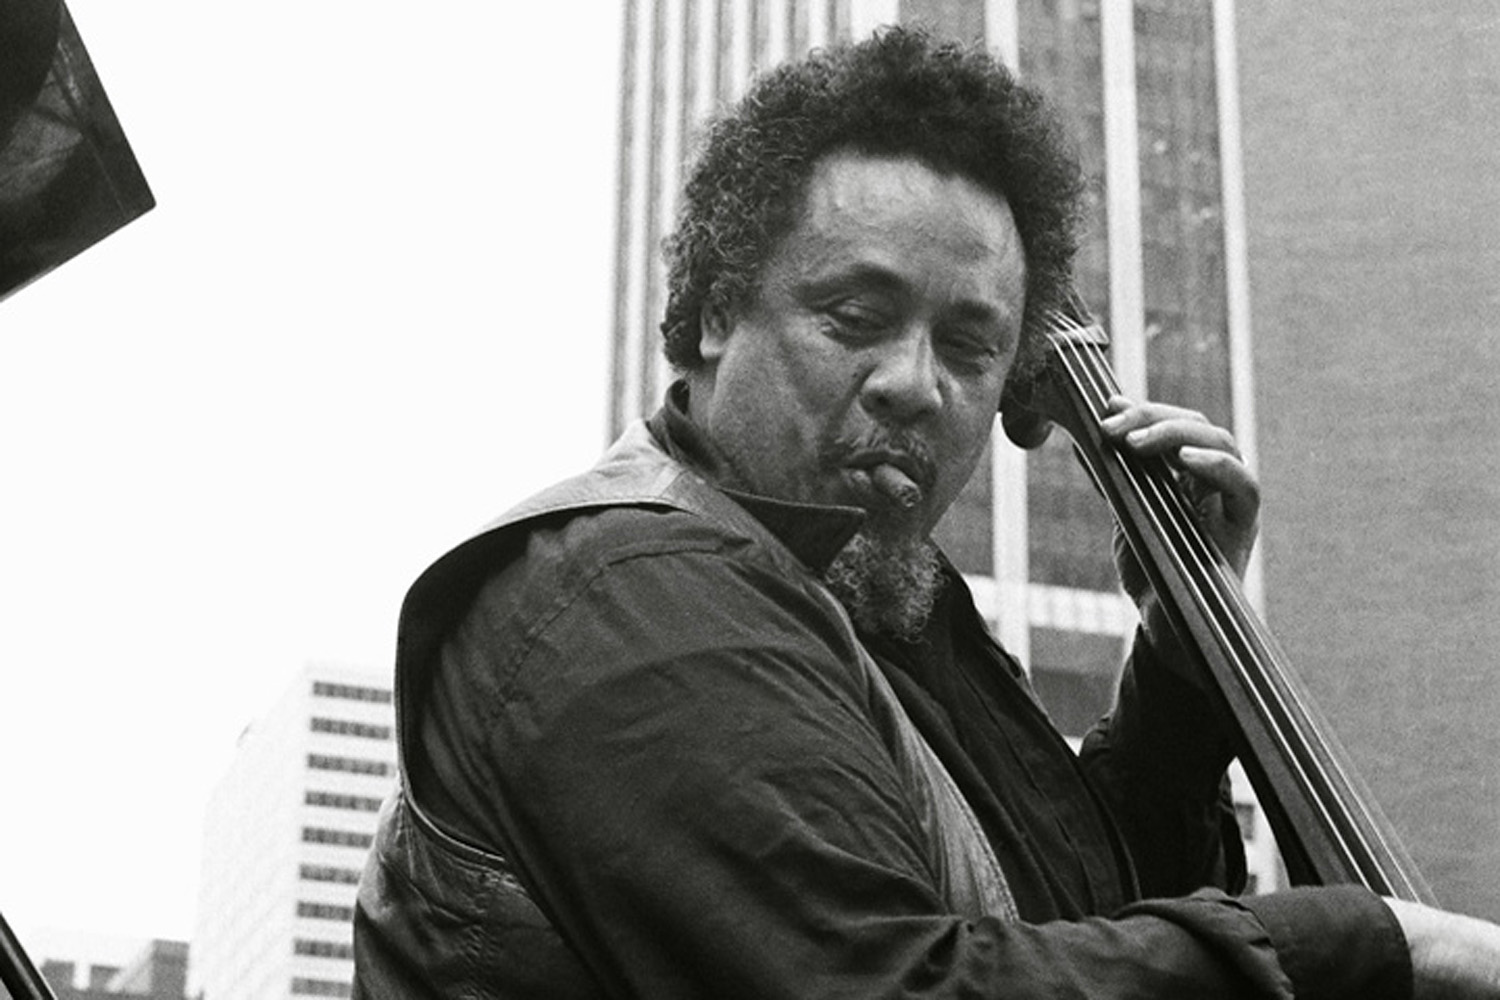 Charles Mingus performs in lower Manhattan, N.Y., as a part of U.S. Bicentennial Celebrations on July 4, 1976. (Tom Marcello / WikiCommons)